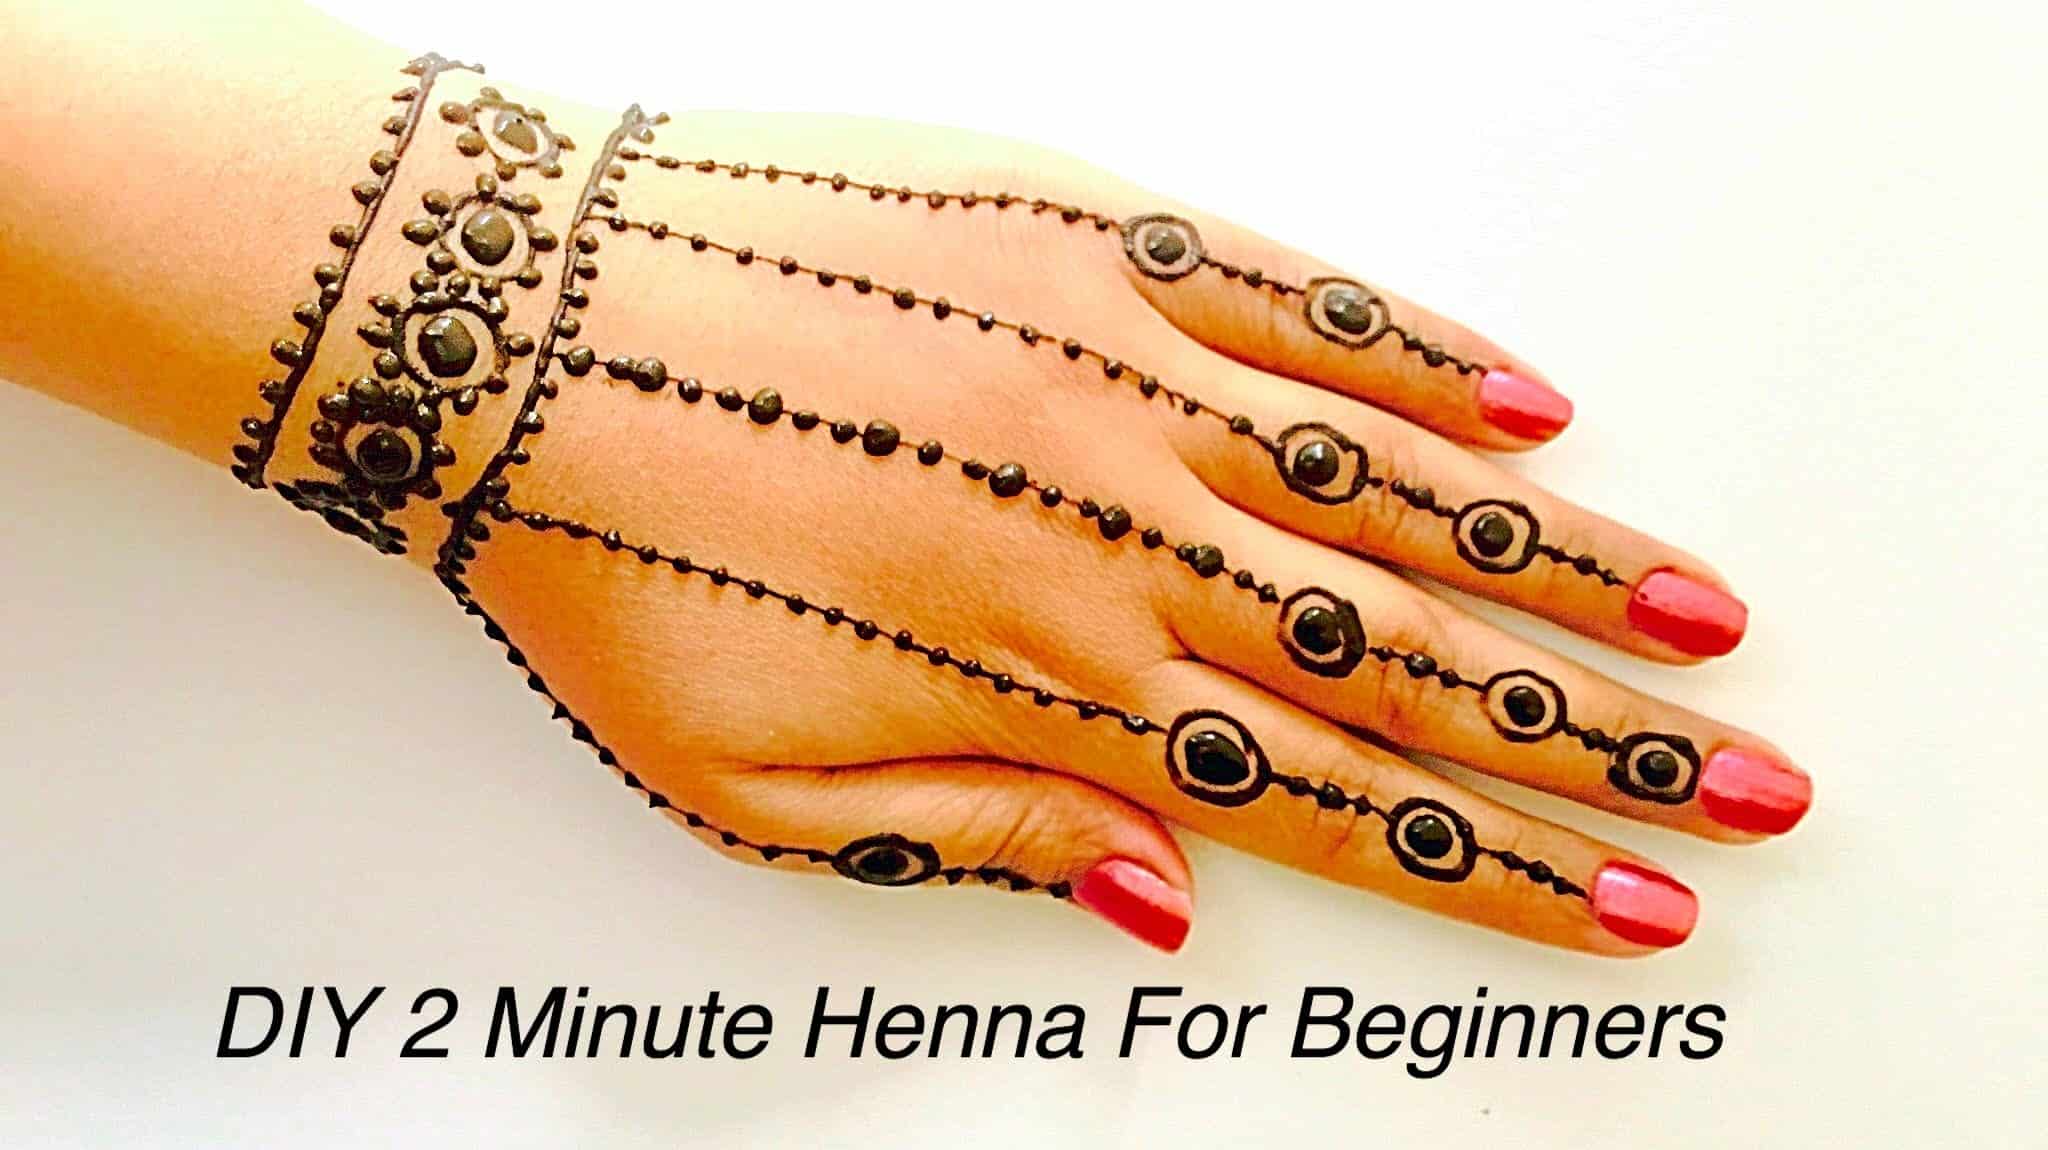 How to remove a henna tattoo luxury easiest henna mehndi tattoo design step by step